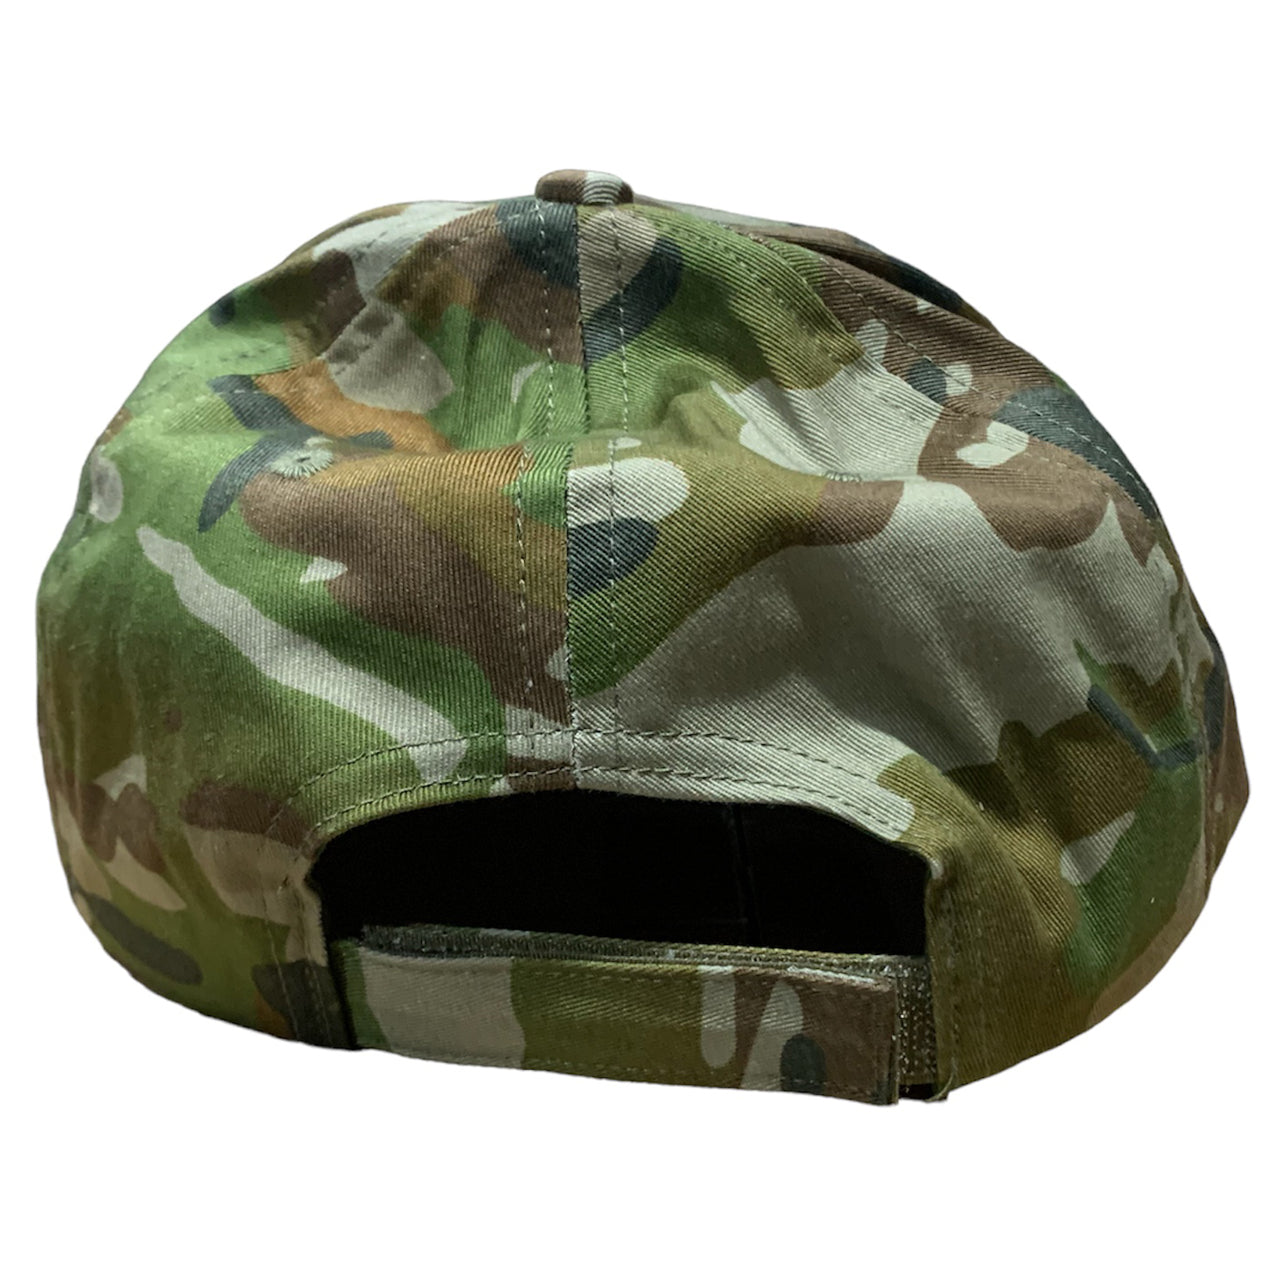 Experience the ultimate in comfort and style with the Army Australian Multicam Baseball Cap. This cap features an adjustable hook & loop back for a perfect fit, making it a One Size Fits All option. Upgrade your headwear game with this versatile and trendy cap! www.defenceqstore.com.au back view